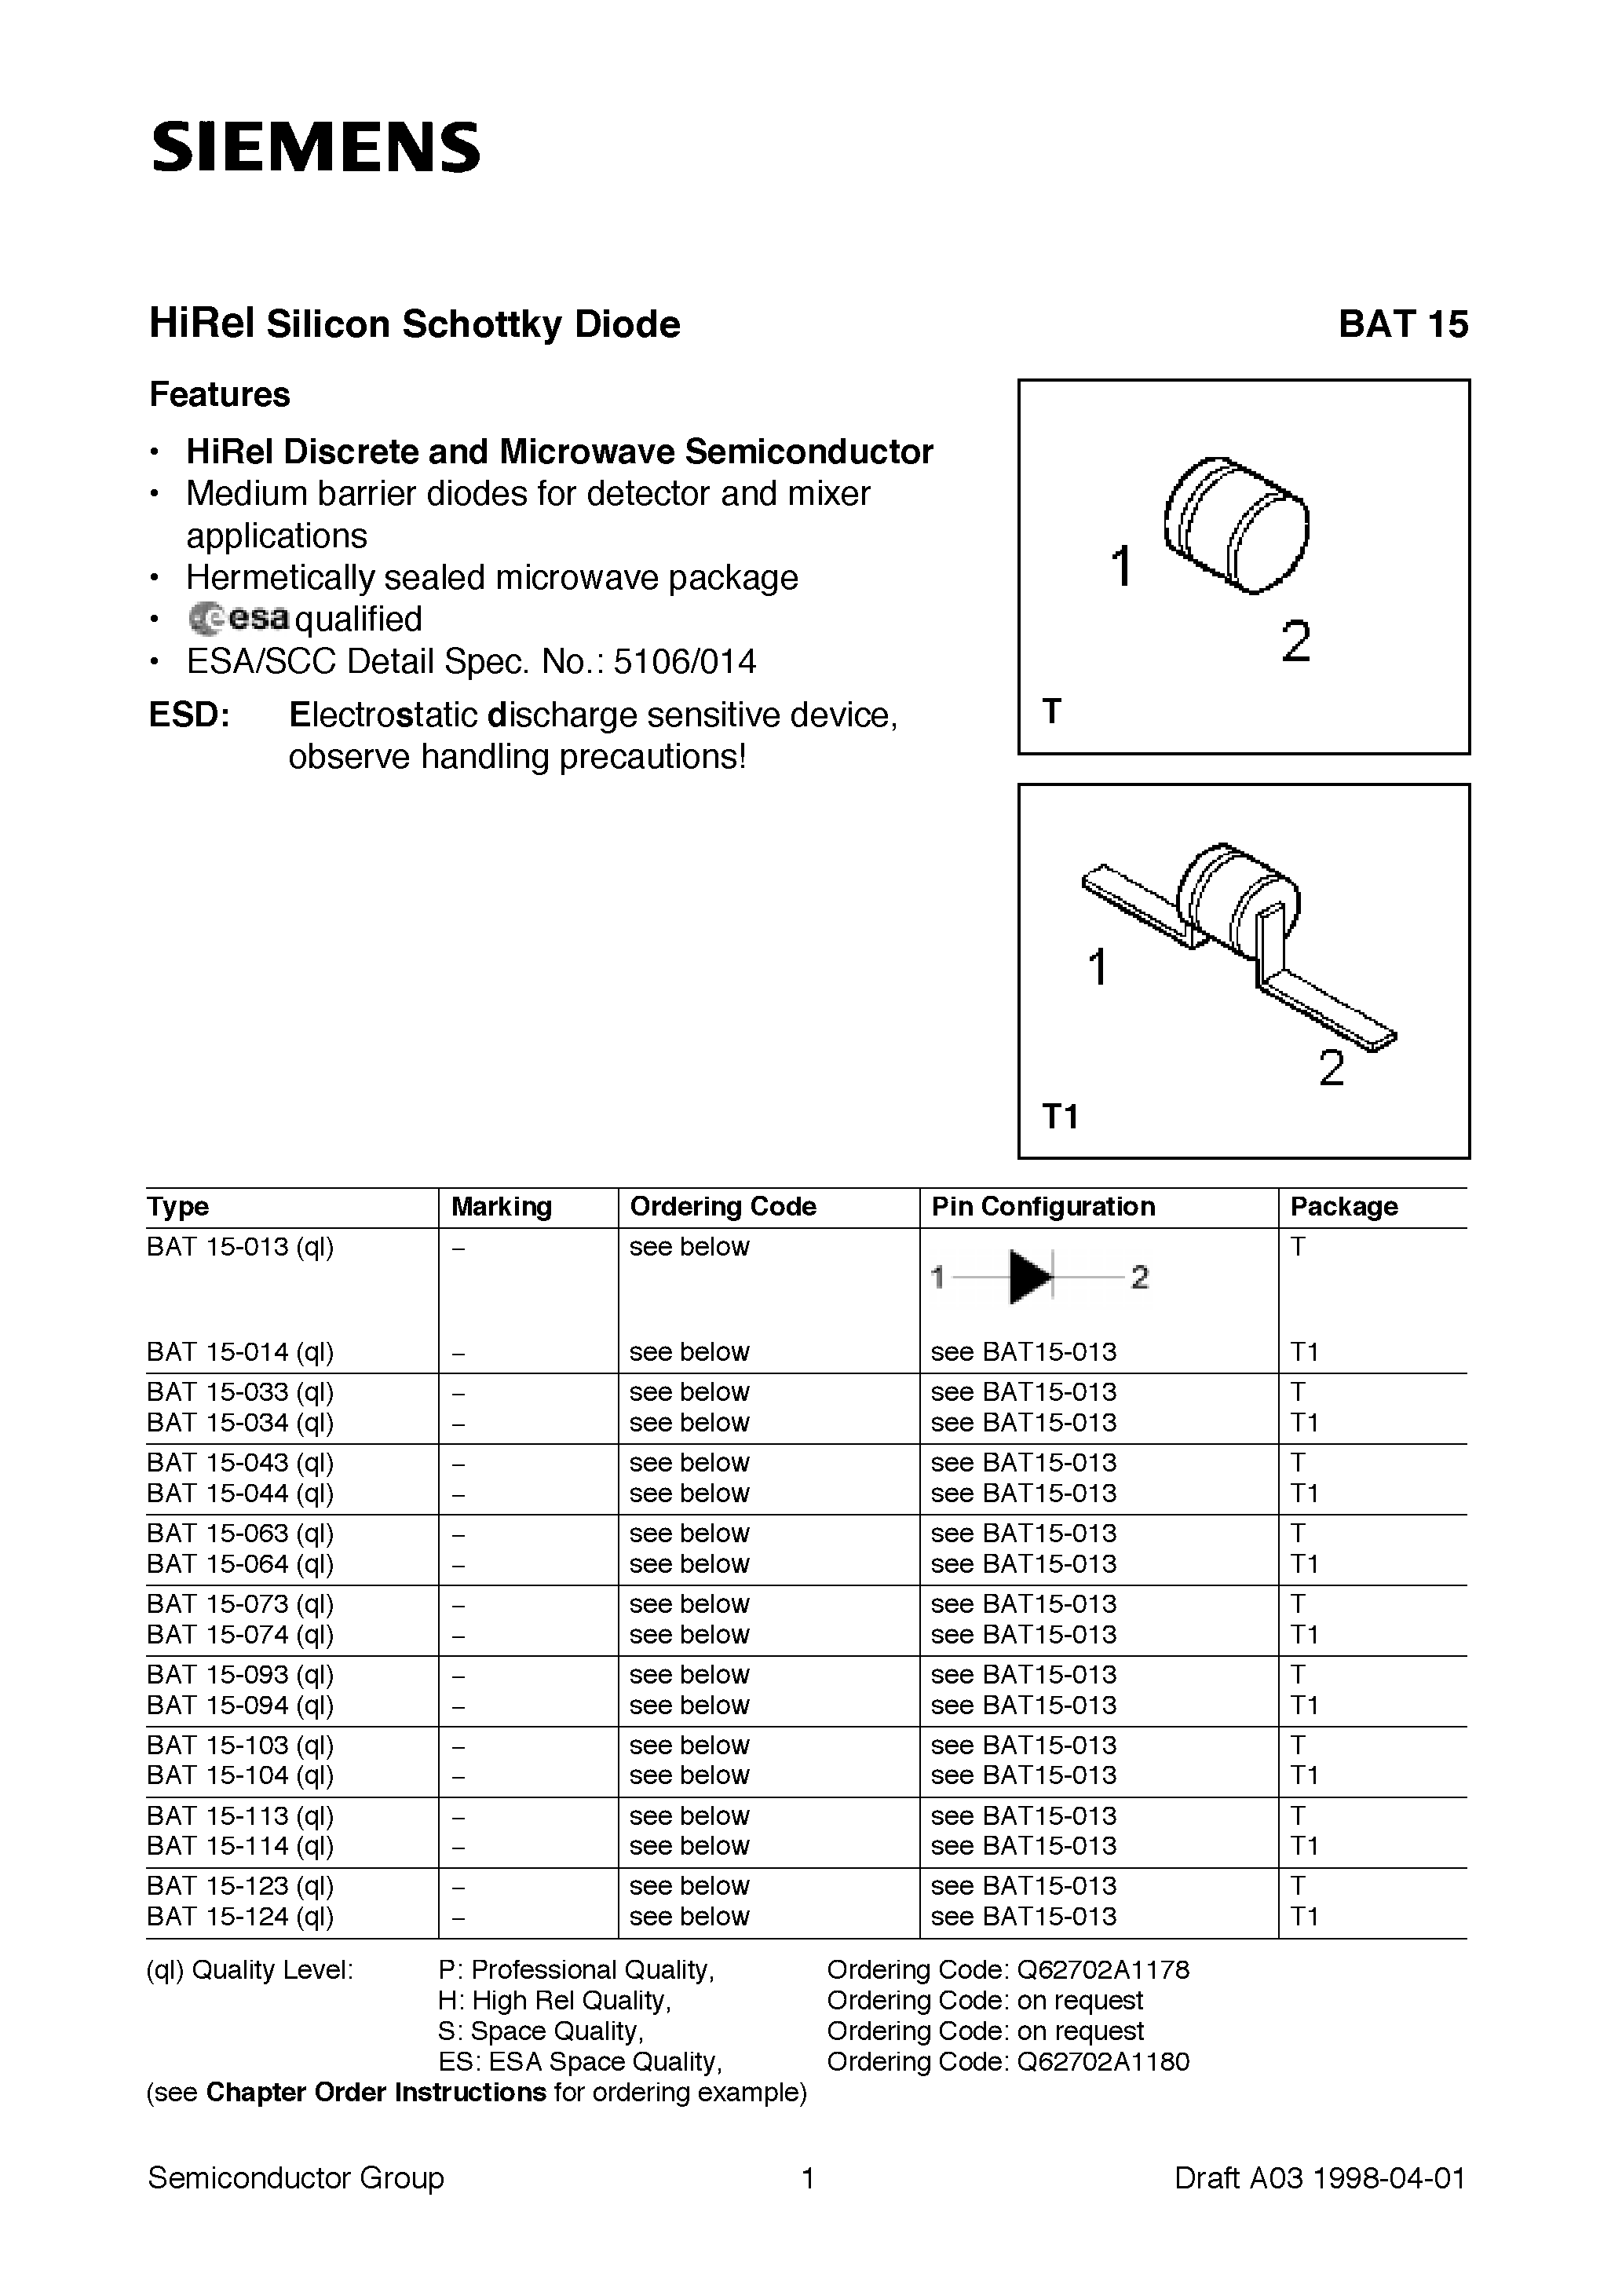 Datasheet BAT15-063 - HiRel Silicon Schottky Diode (HiRel Discrete and Microwave Semiconductor Medium barrier diodes for detector and mixer applications) page 1